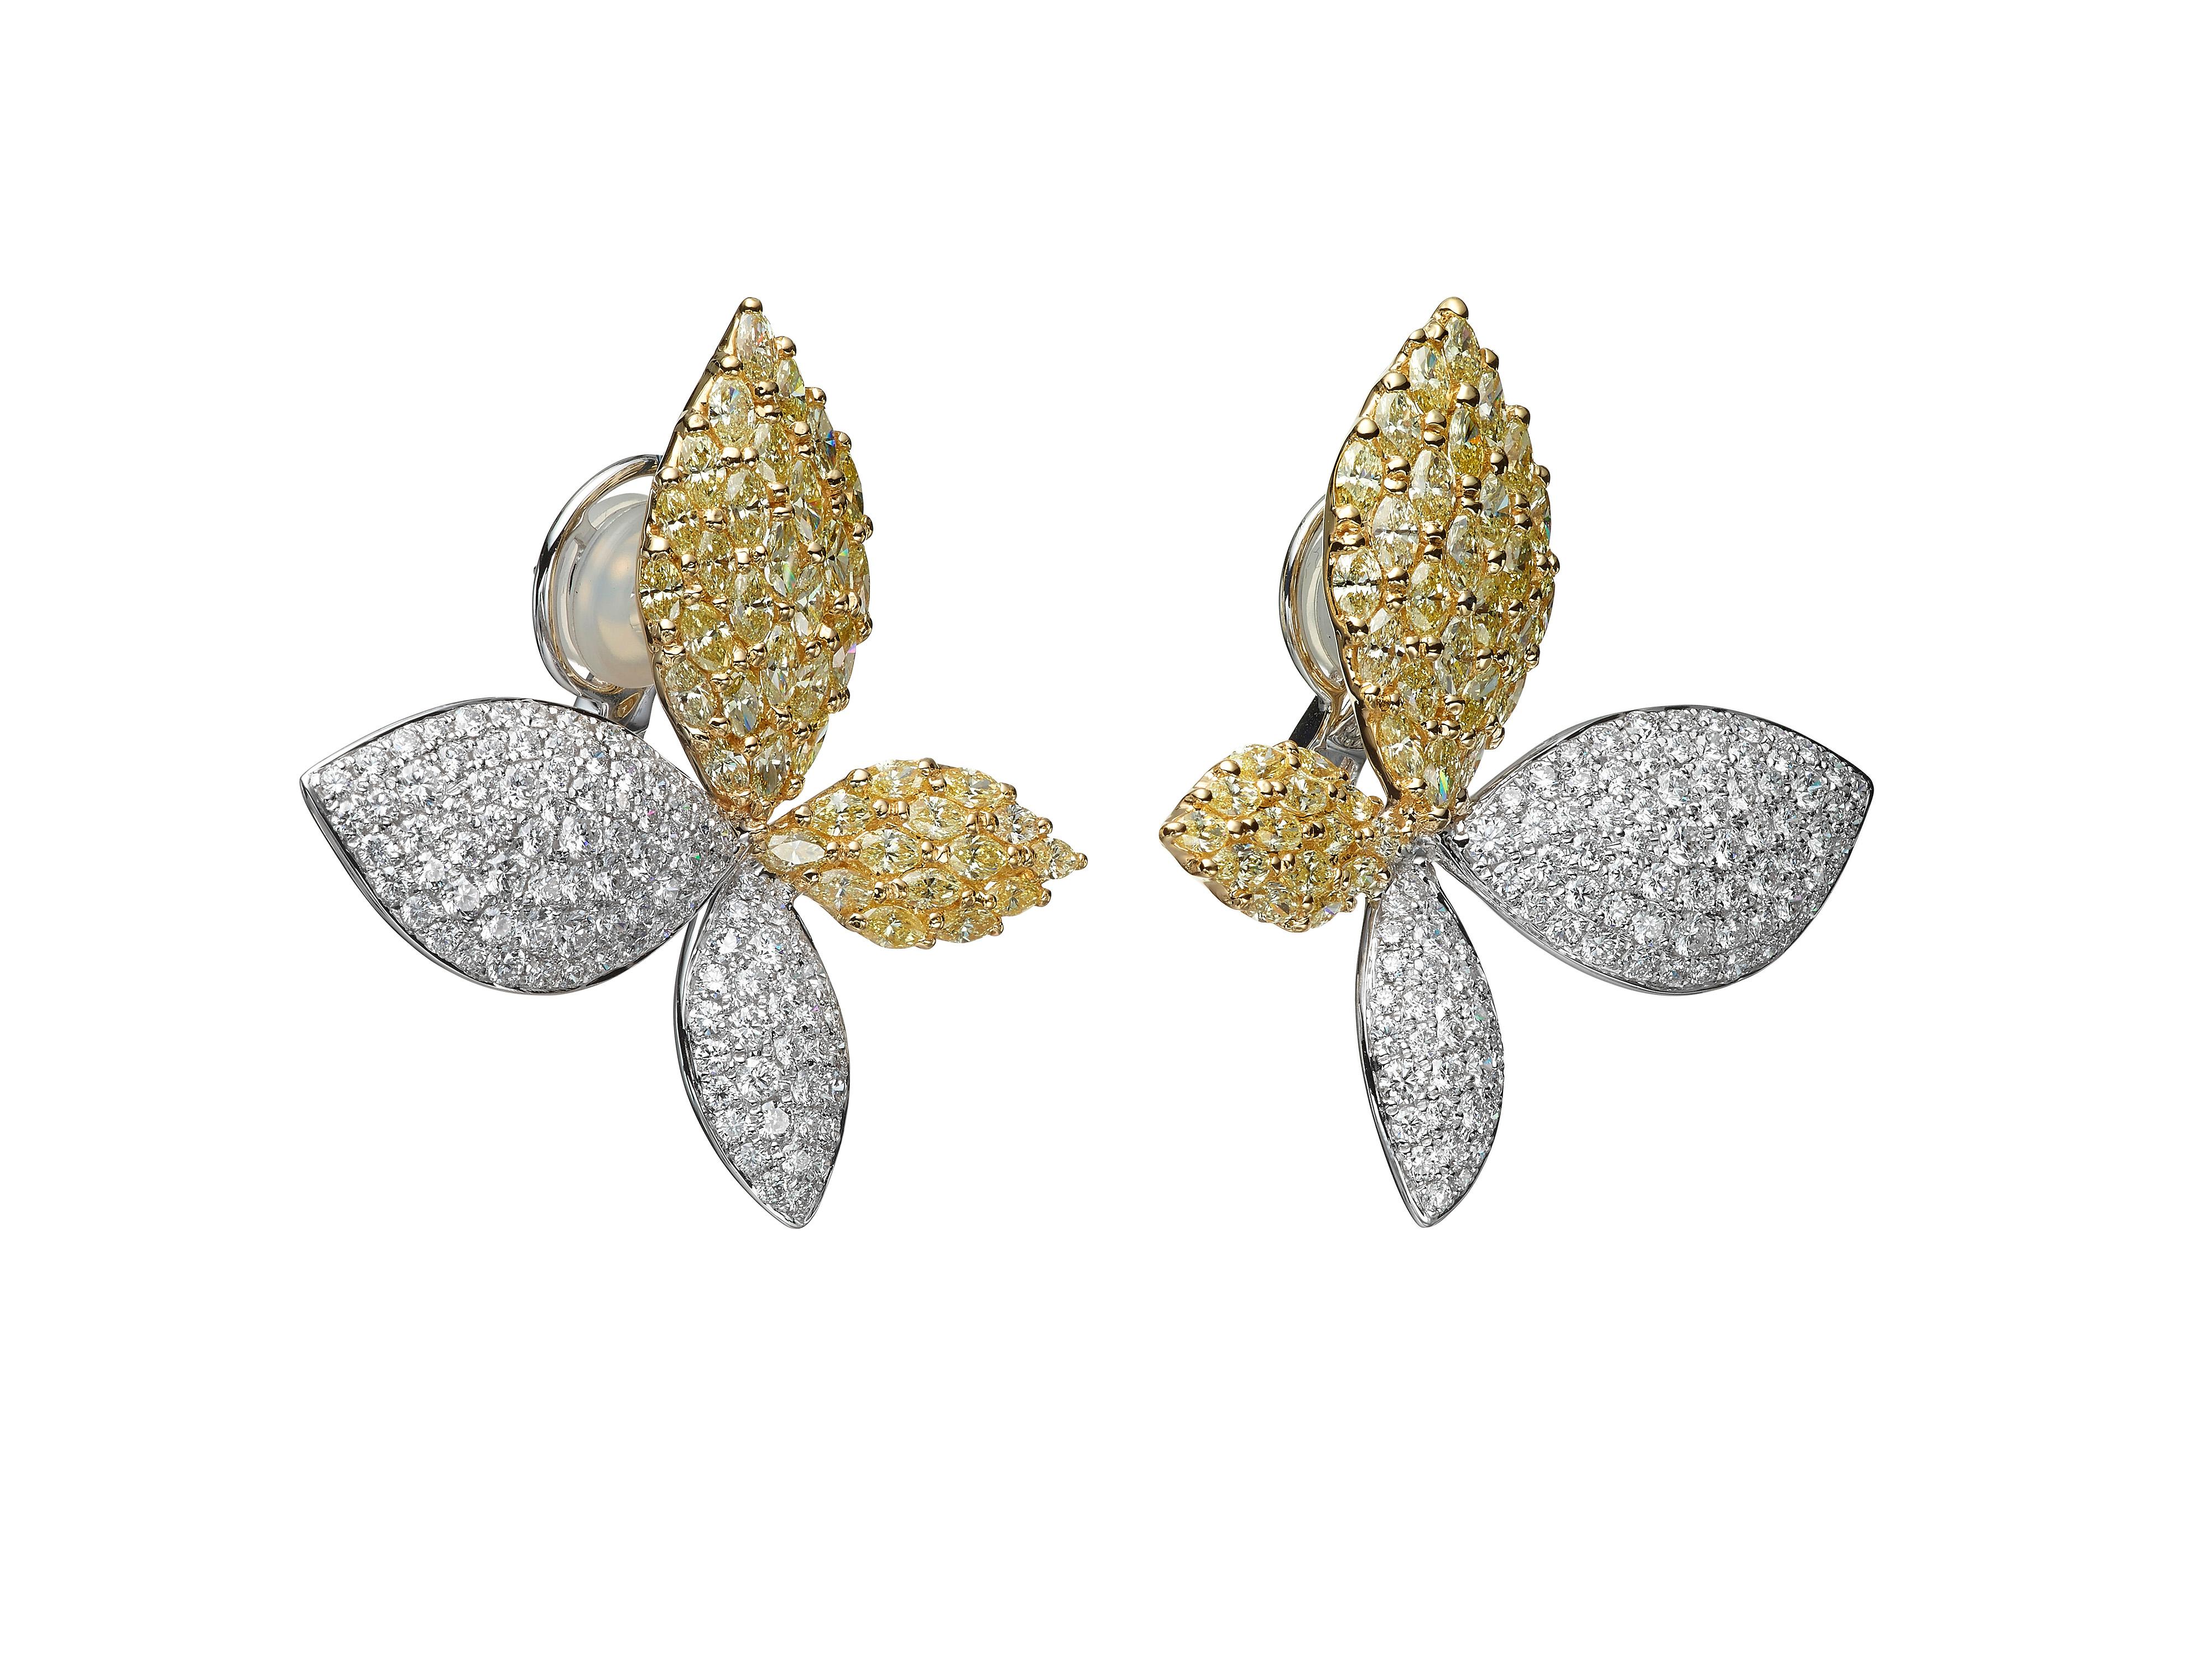 8.20 carats of white round diamonds and yellow marquise diamonds cluster to form elegant leaf shaped stud earrings.  Set in 18K white gold and 18K yellow gold.

Composition: 
18K White Gold, 18K Yellow Gold
198 Round Diamonds: 3.45 carats 
80